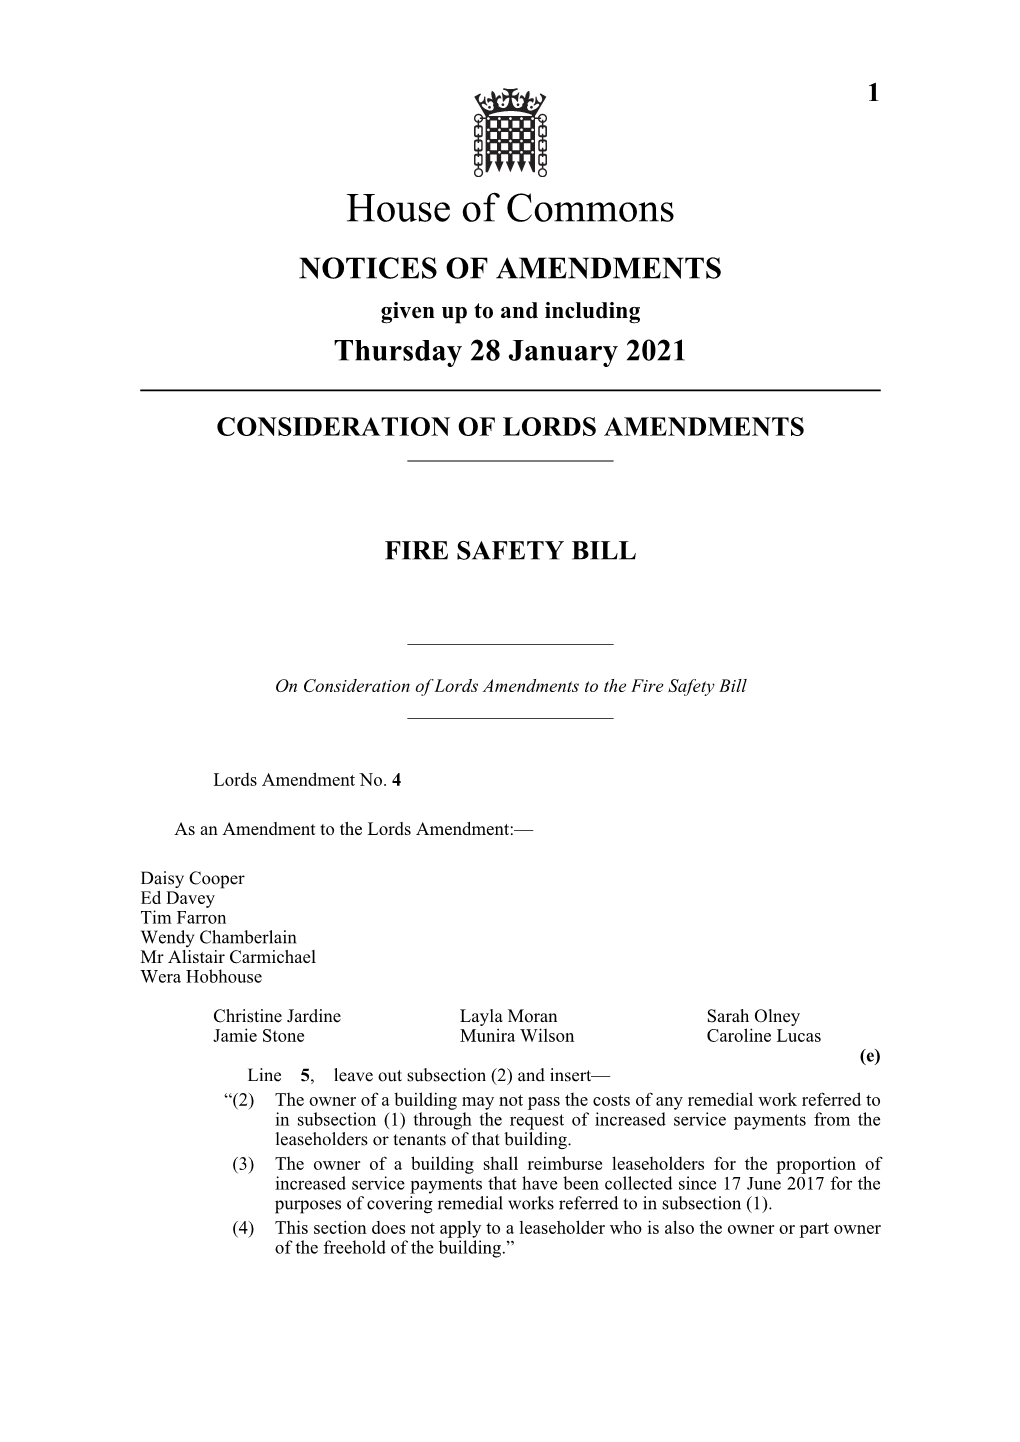 House of Commons NOTICES of AMENDMENTS Given up to and Including Thursday 28 January 2021